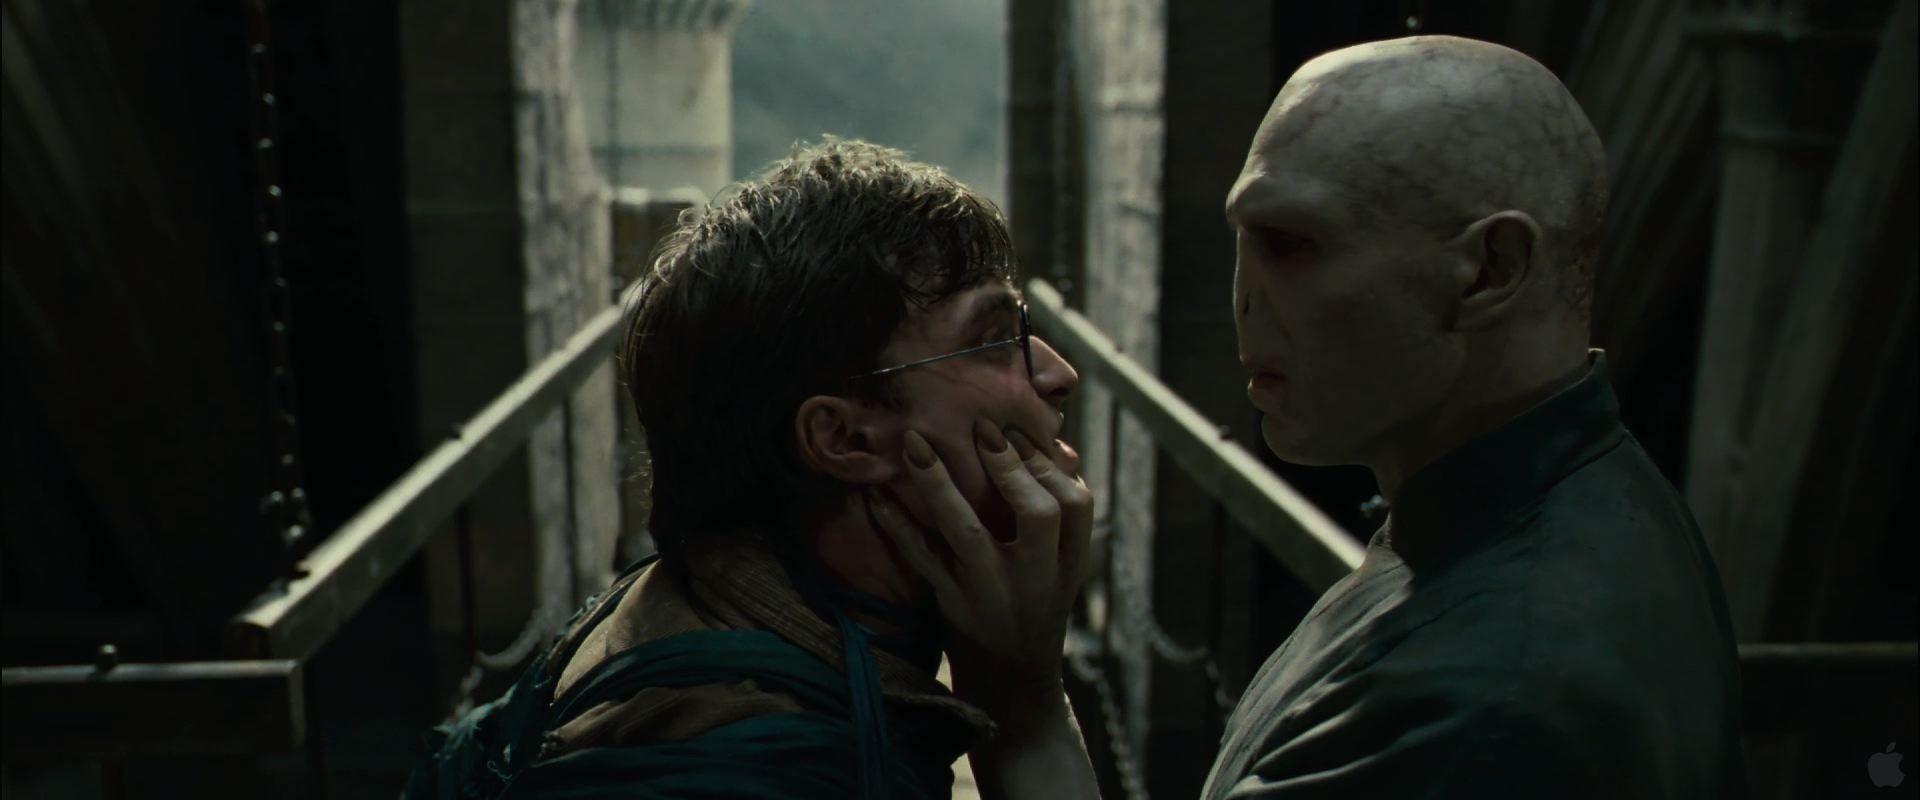 Voldemort Confronts Harry from Harry Potter and the Deathly Hallows